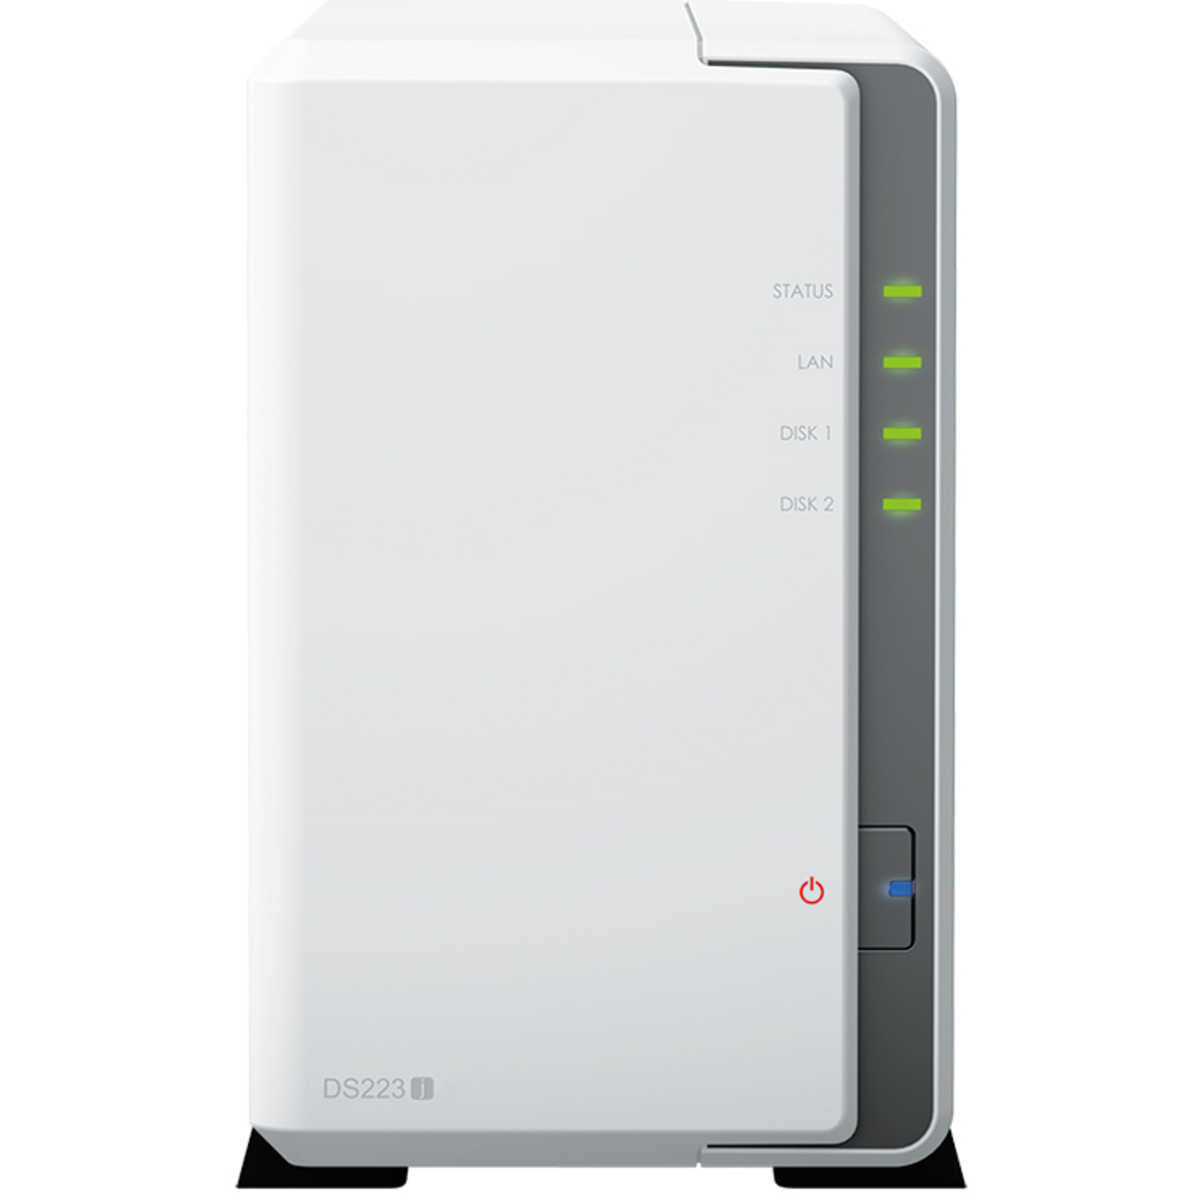 buy Synology DiskStation DS223j 48tb Desktop NAS - Network Attached Storage Device 2x24000gb Western Digital Ultrastar HC580 WUH722424ALE6L4 3.5 7200rpm SATA 6Gb/s HDD ENTERPRISE Class Drives Installed - Burn-In Tested - nas headquarters buy network attached storage server device das new raid-5 free shipping simply usa DiskStation DS223j